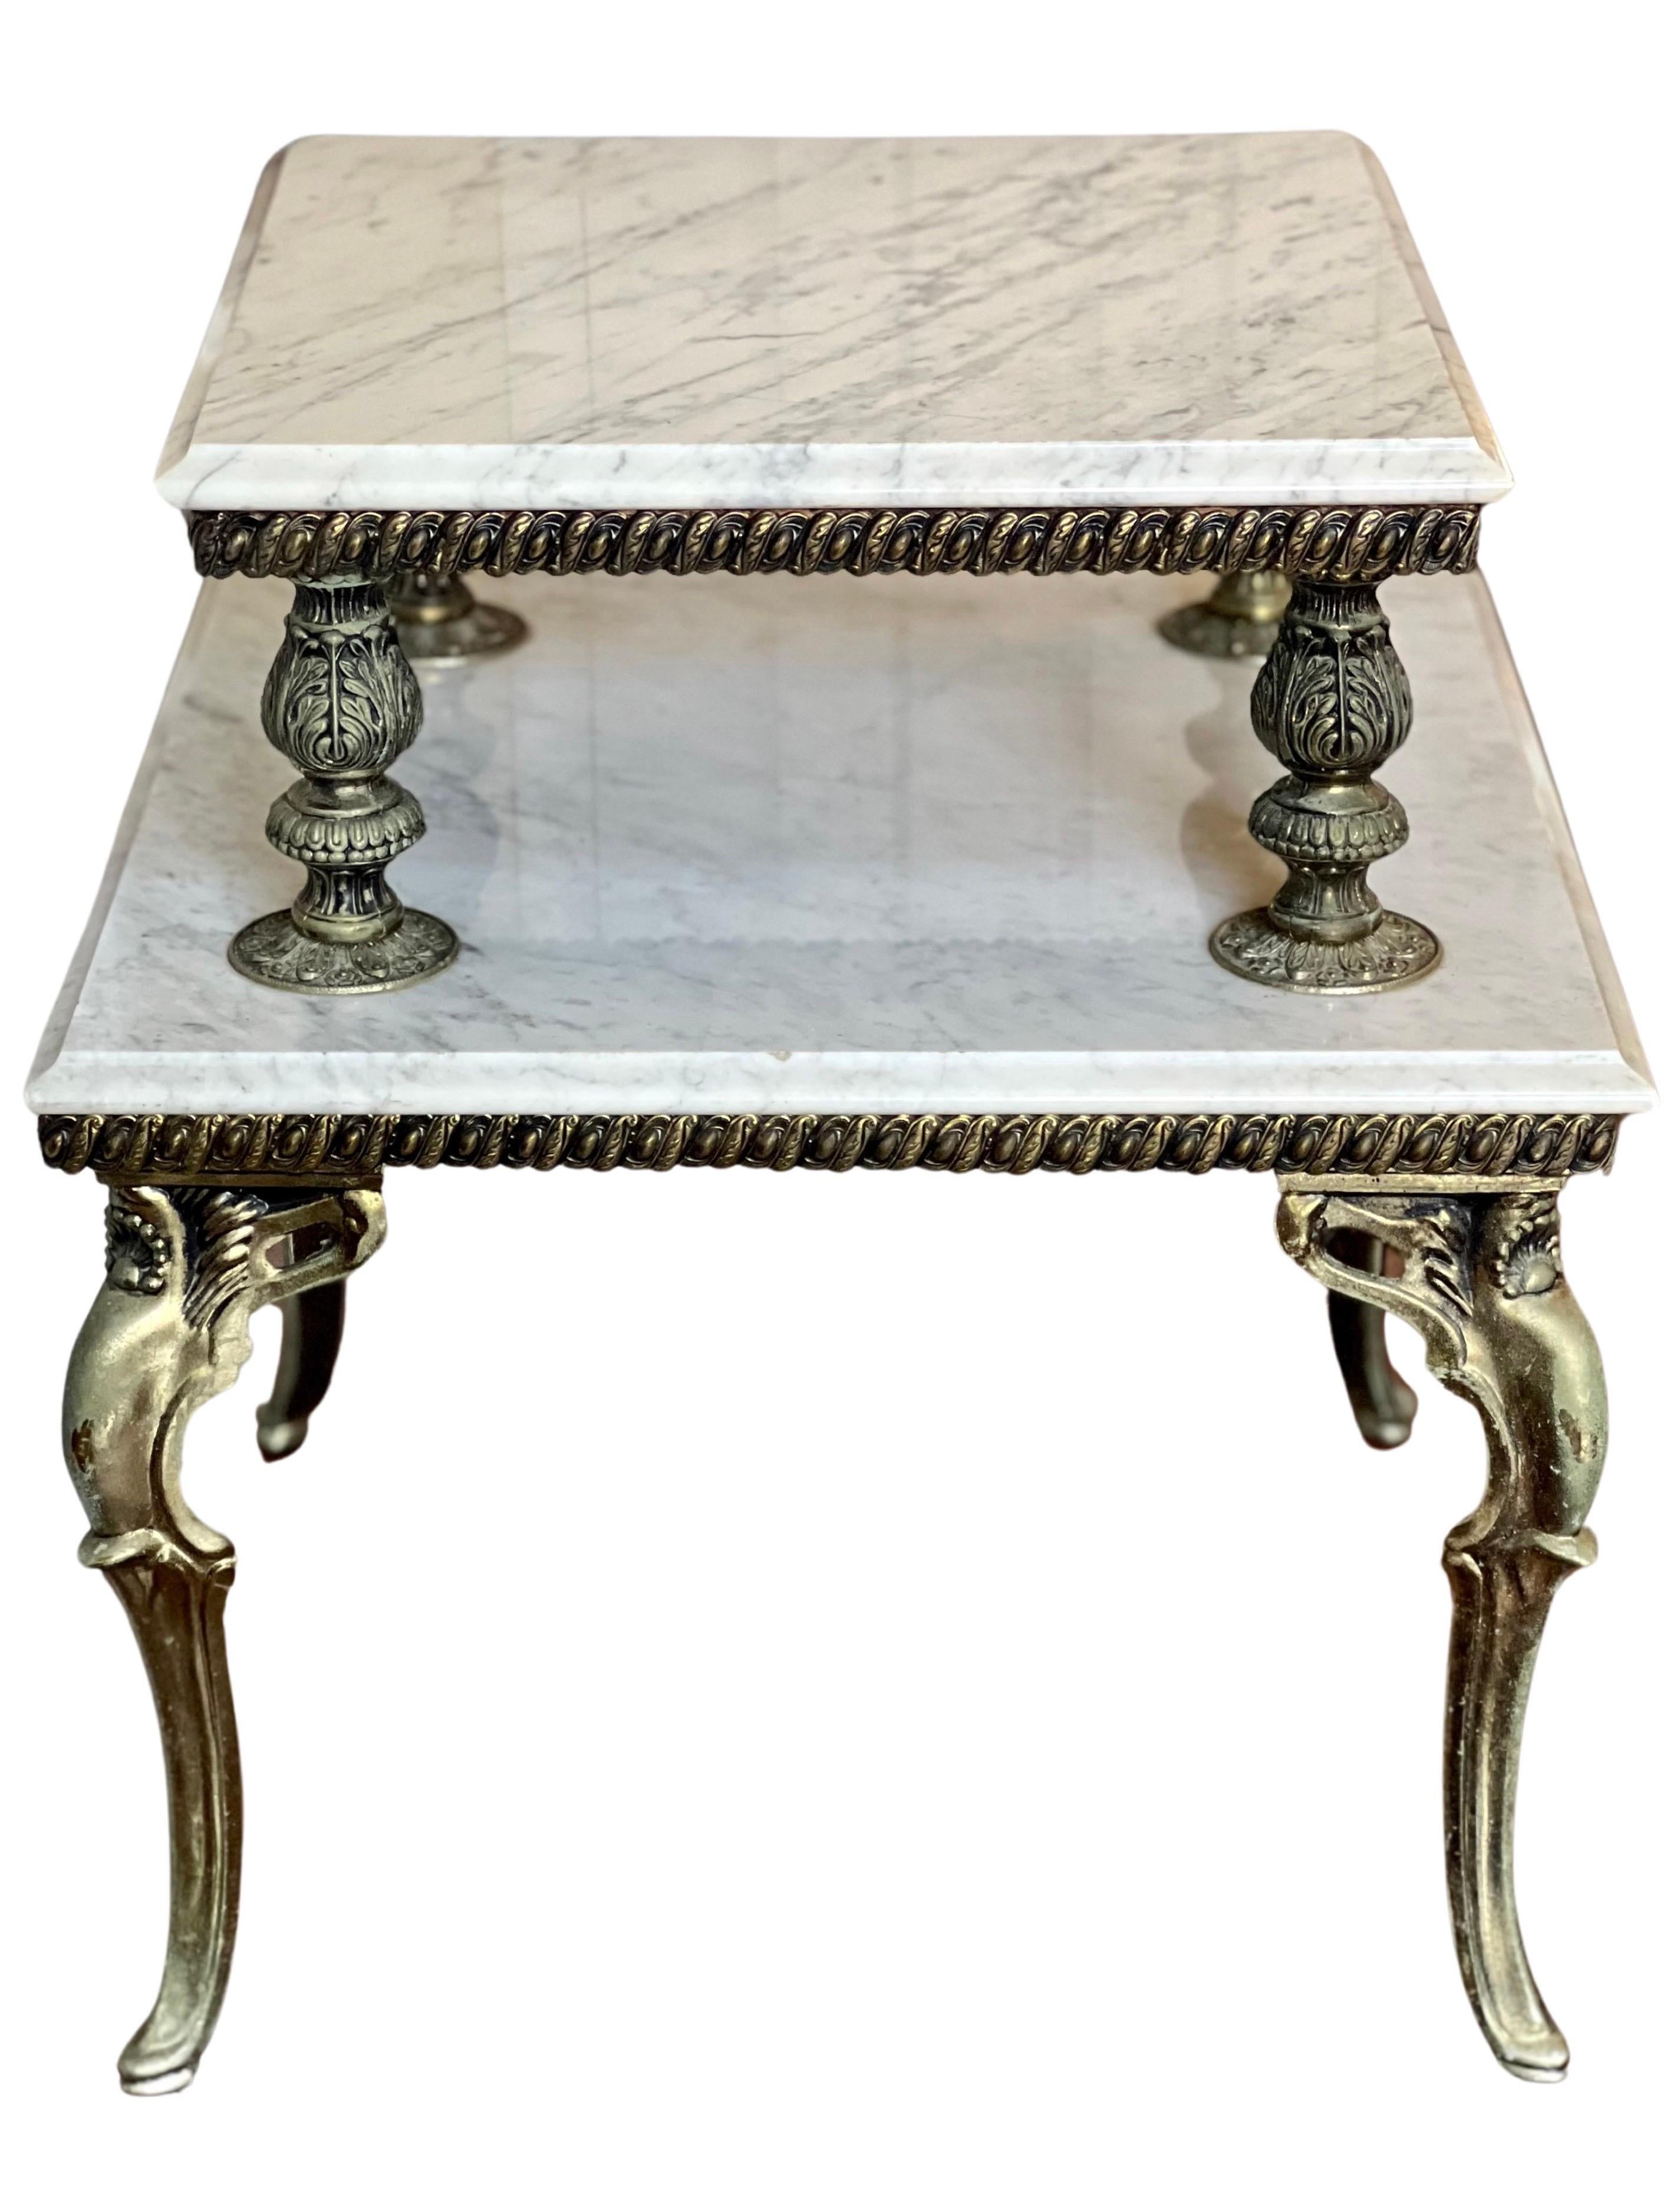 Carrera marble and gilded brass two tier side table, France circa 1940's.

Elegant Hollywood Regency style table featuring two beveled marble tiers atop graceful cabriole legs with acanthus leaf and shell motifs. Finely detailed balustrade form